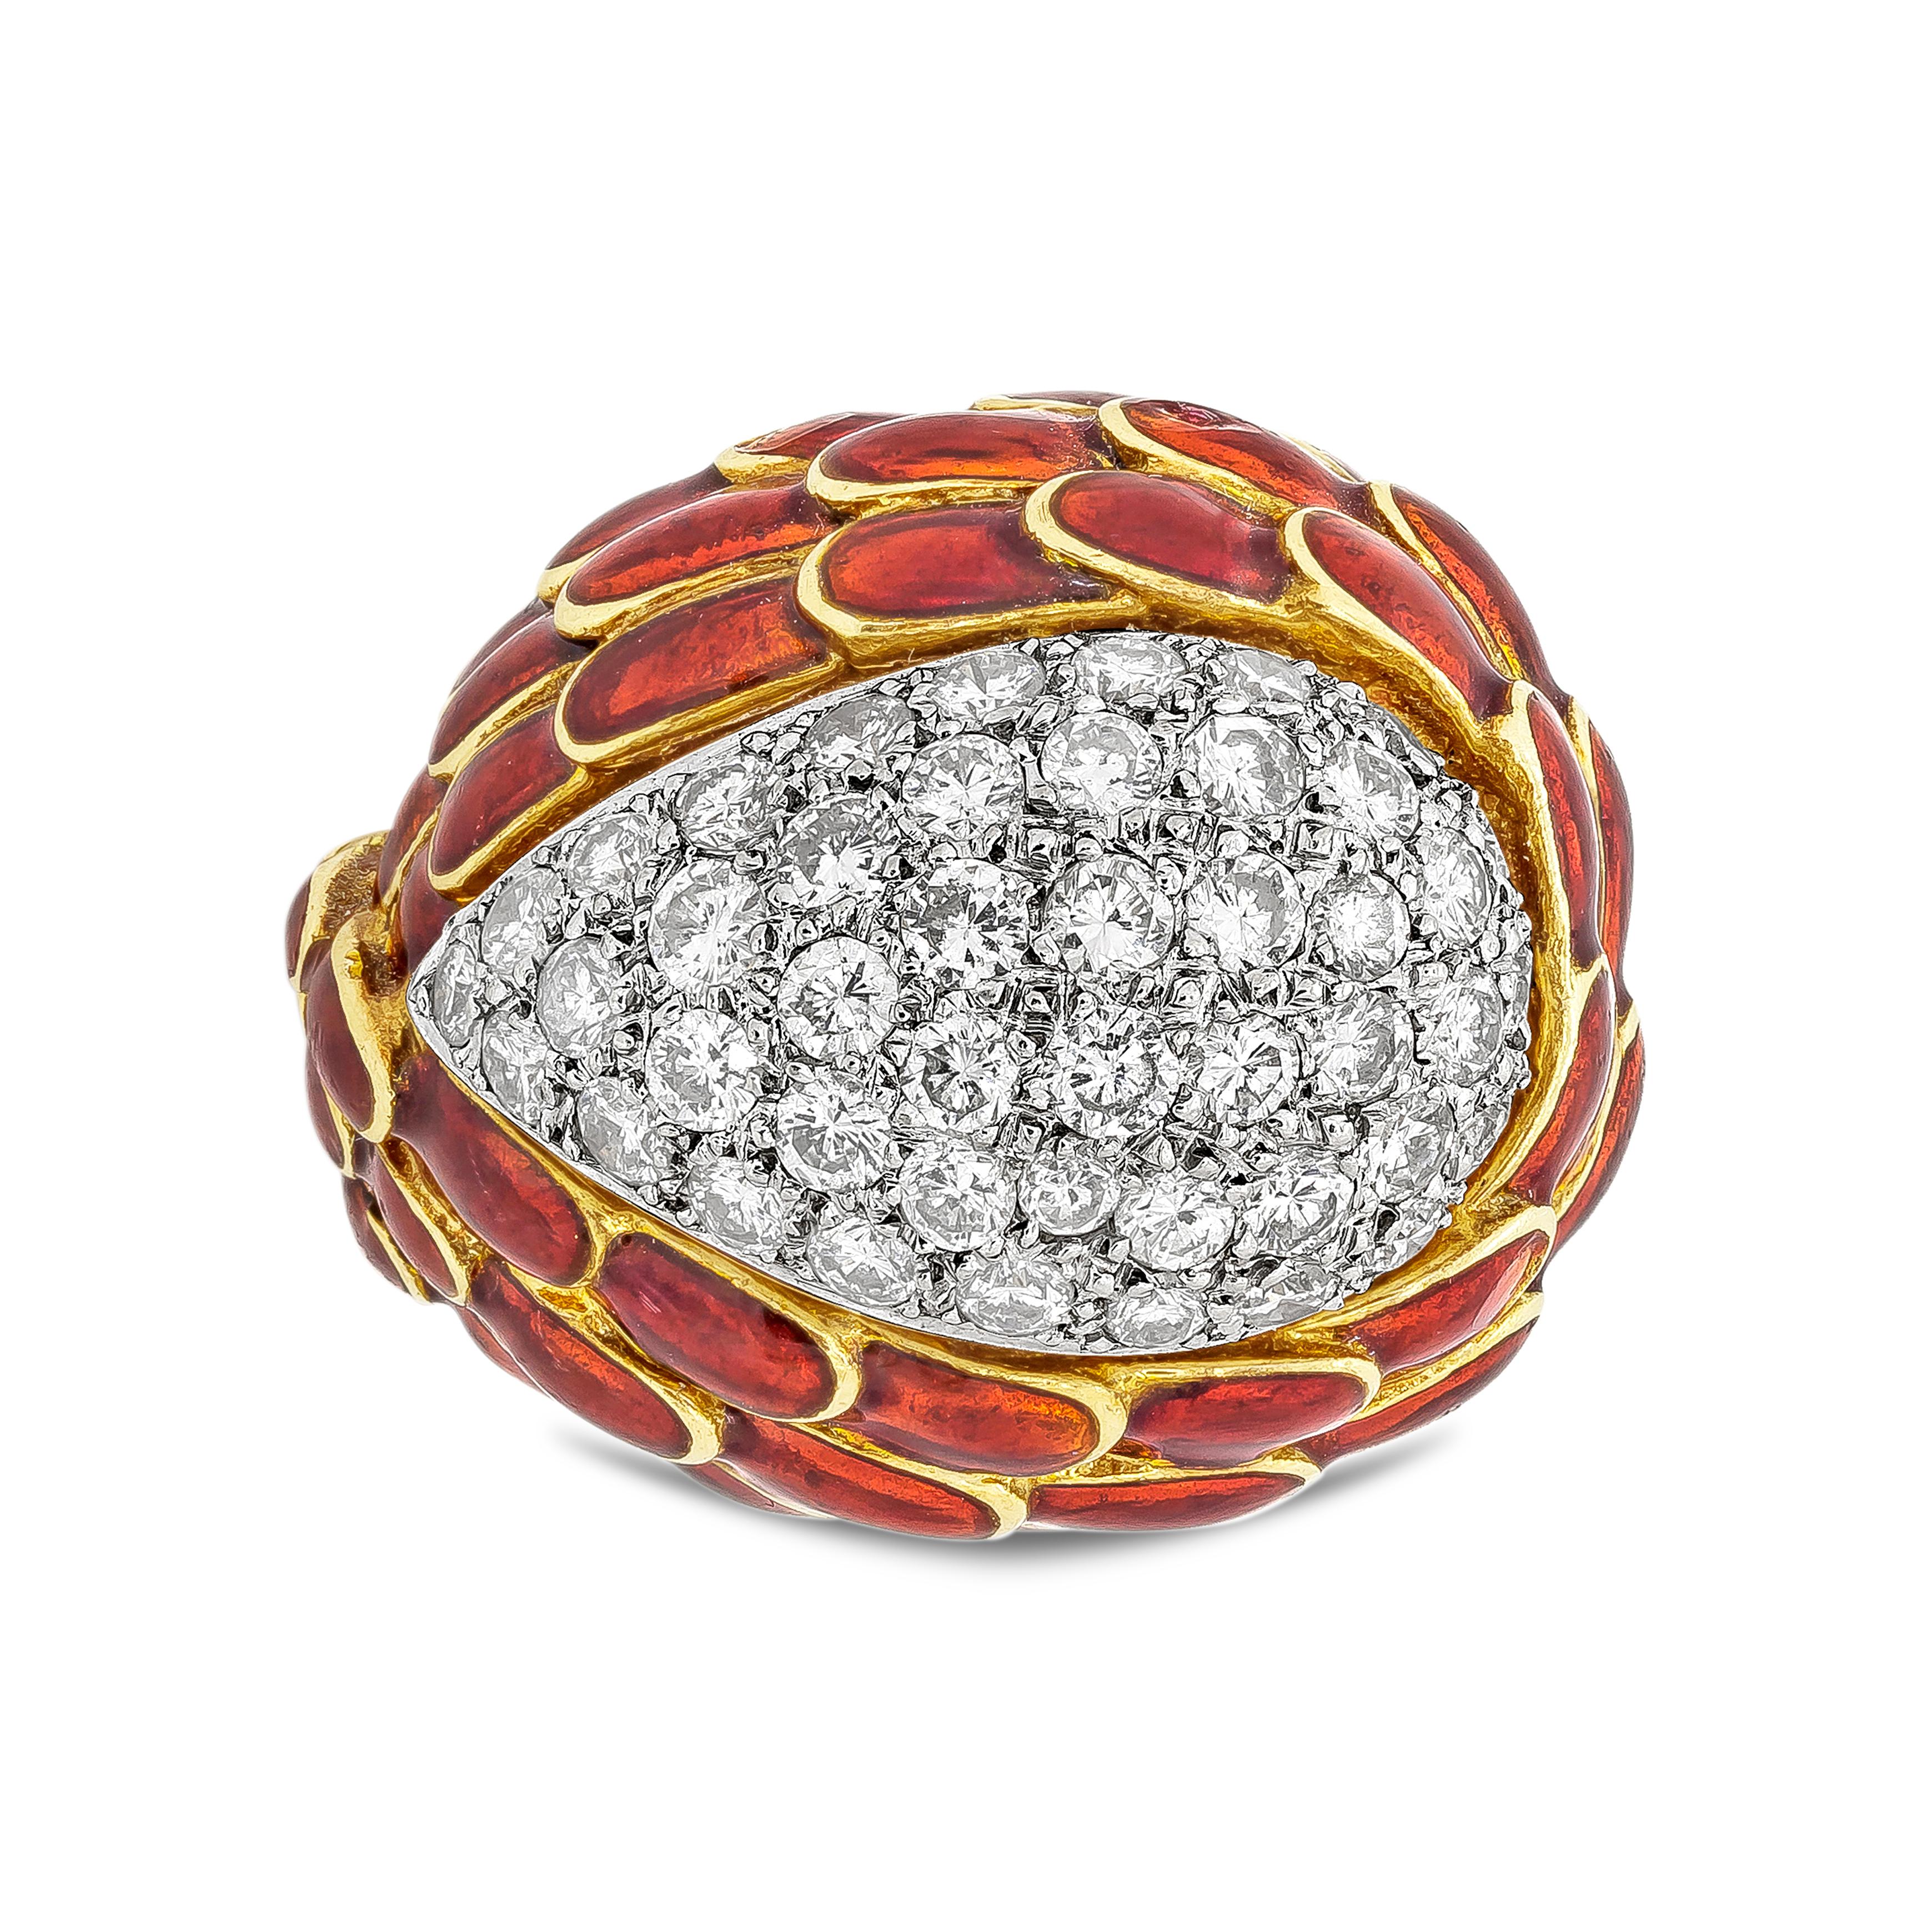 A unique and stylish cocktail ring showcasing a micro-pave of round diamonds weighing 1.40 carats total, set in a domed pear shape. Enclosing the diamonds is a bird wing design made in red enamel. Made in Italy, 18k yellow gold.